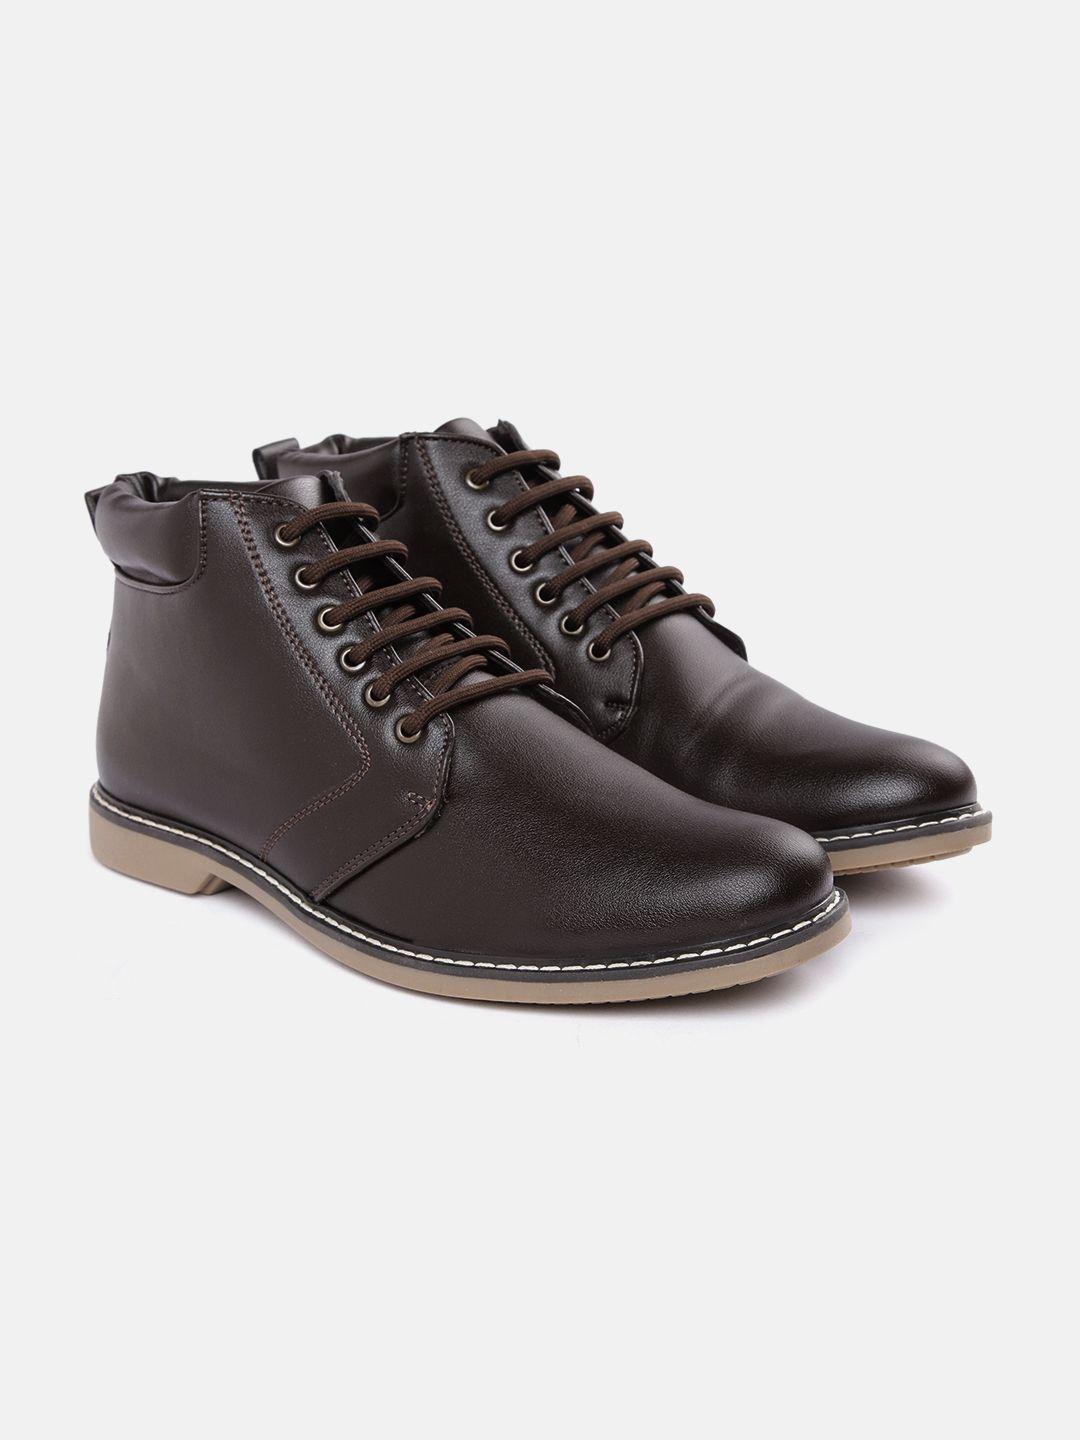 carlton london men coffee brown solid mid-top flat boots